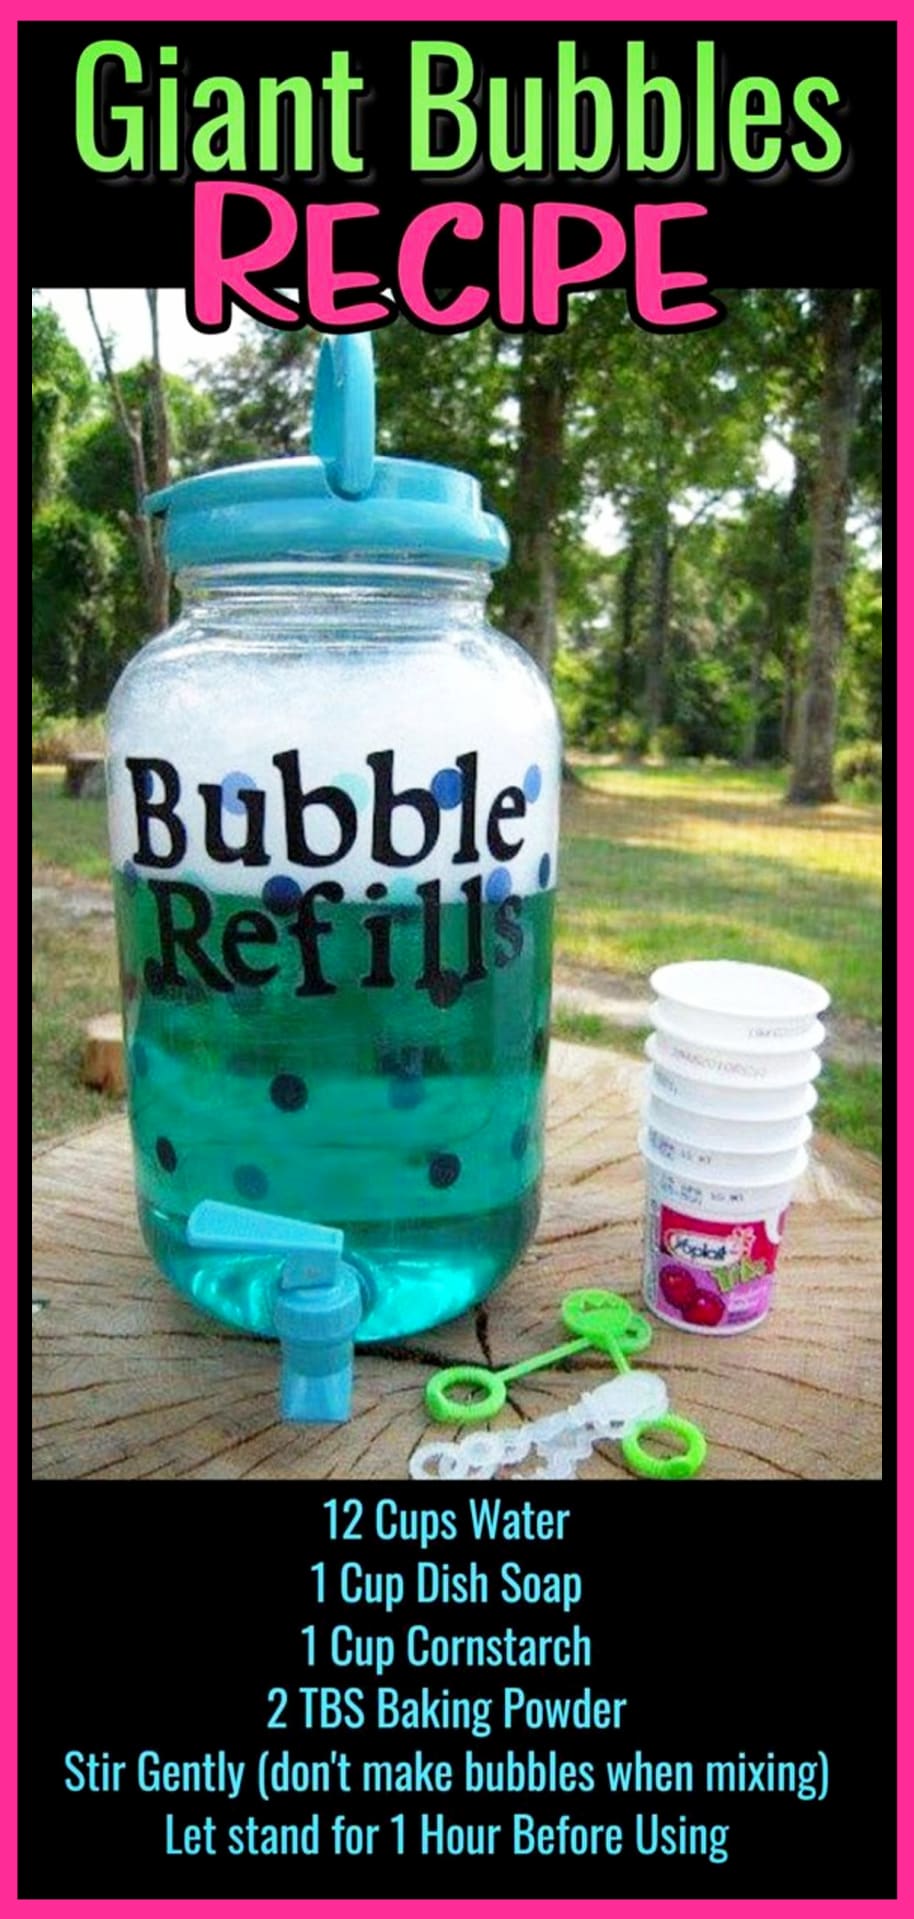 Giant Bubble Recipe! Bubbles recipe for kids - homemade bubbles recipe - how to make giant bubbles recipes and other fun outdoor activities for kids this spring and summer.  This is the BEST bubbles recipe for kids - easy DIY giant bubble recipe to make strong BIG bubbles with dawn dishwashing liquid, corn starch and without glycerin - unpoppable no pop giant bubble recipe